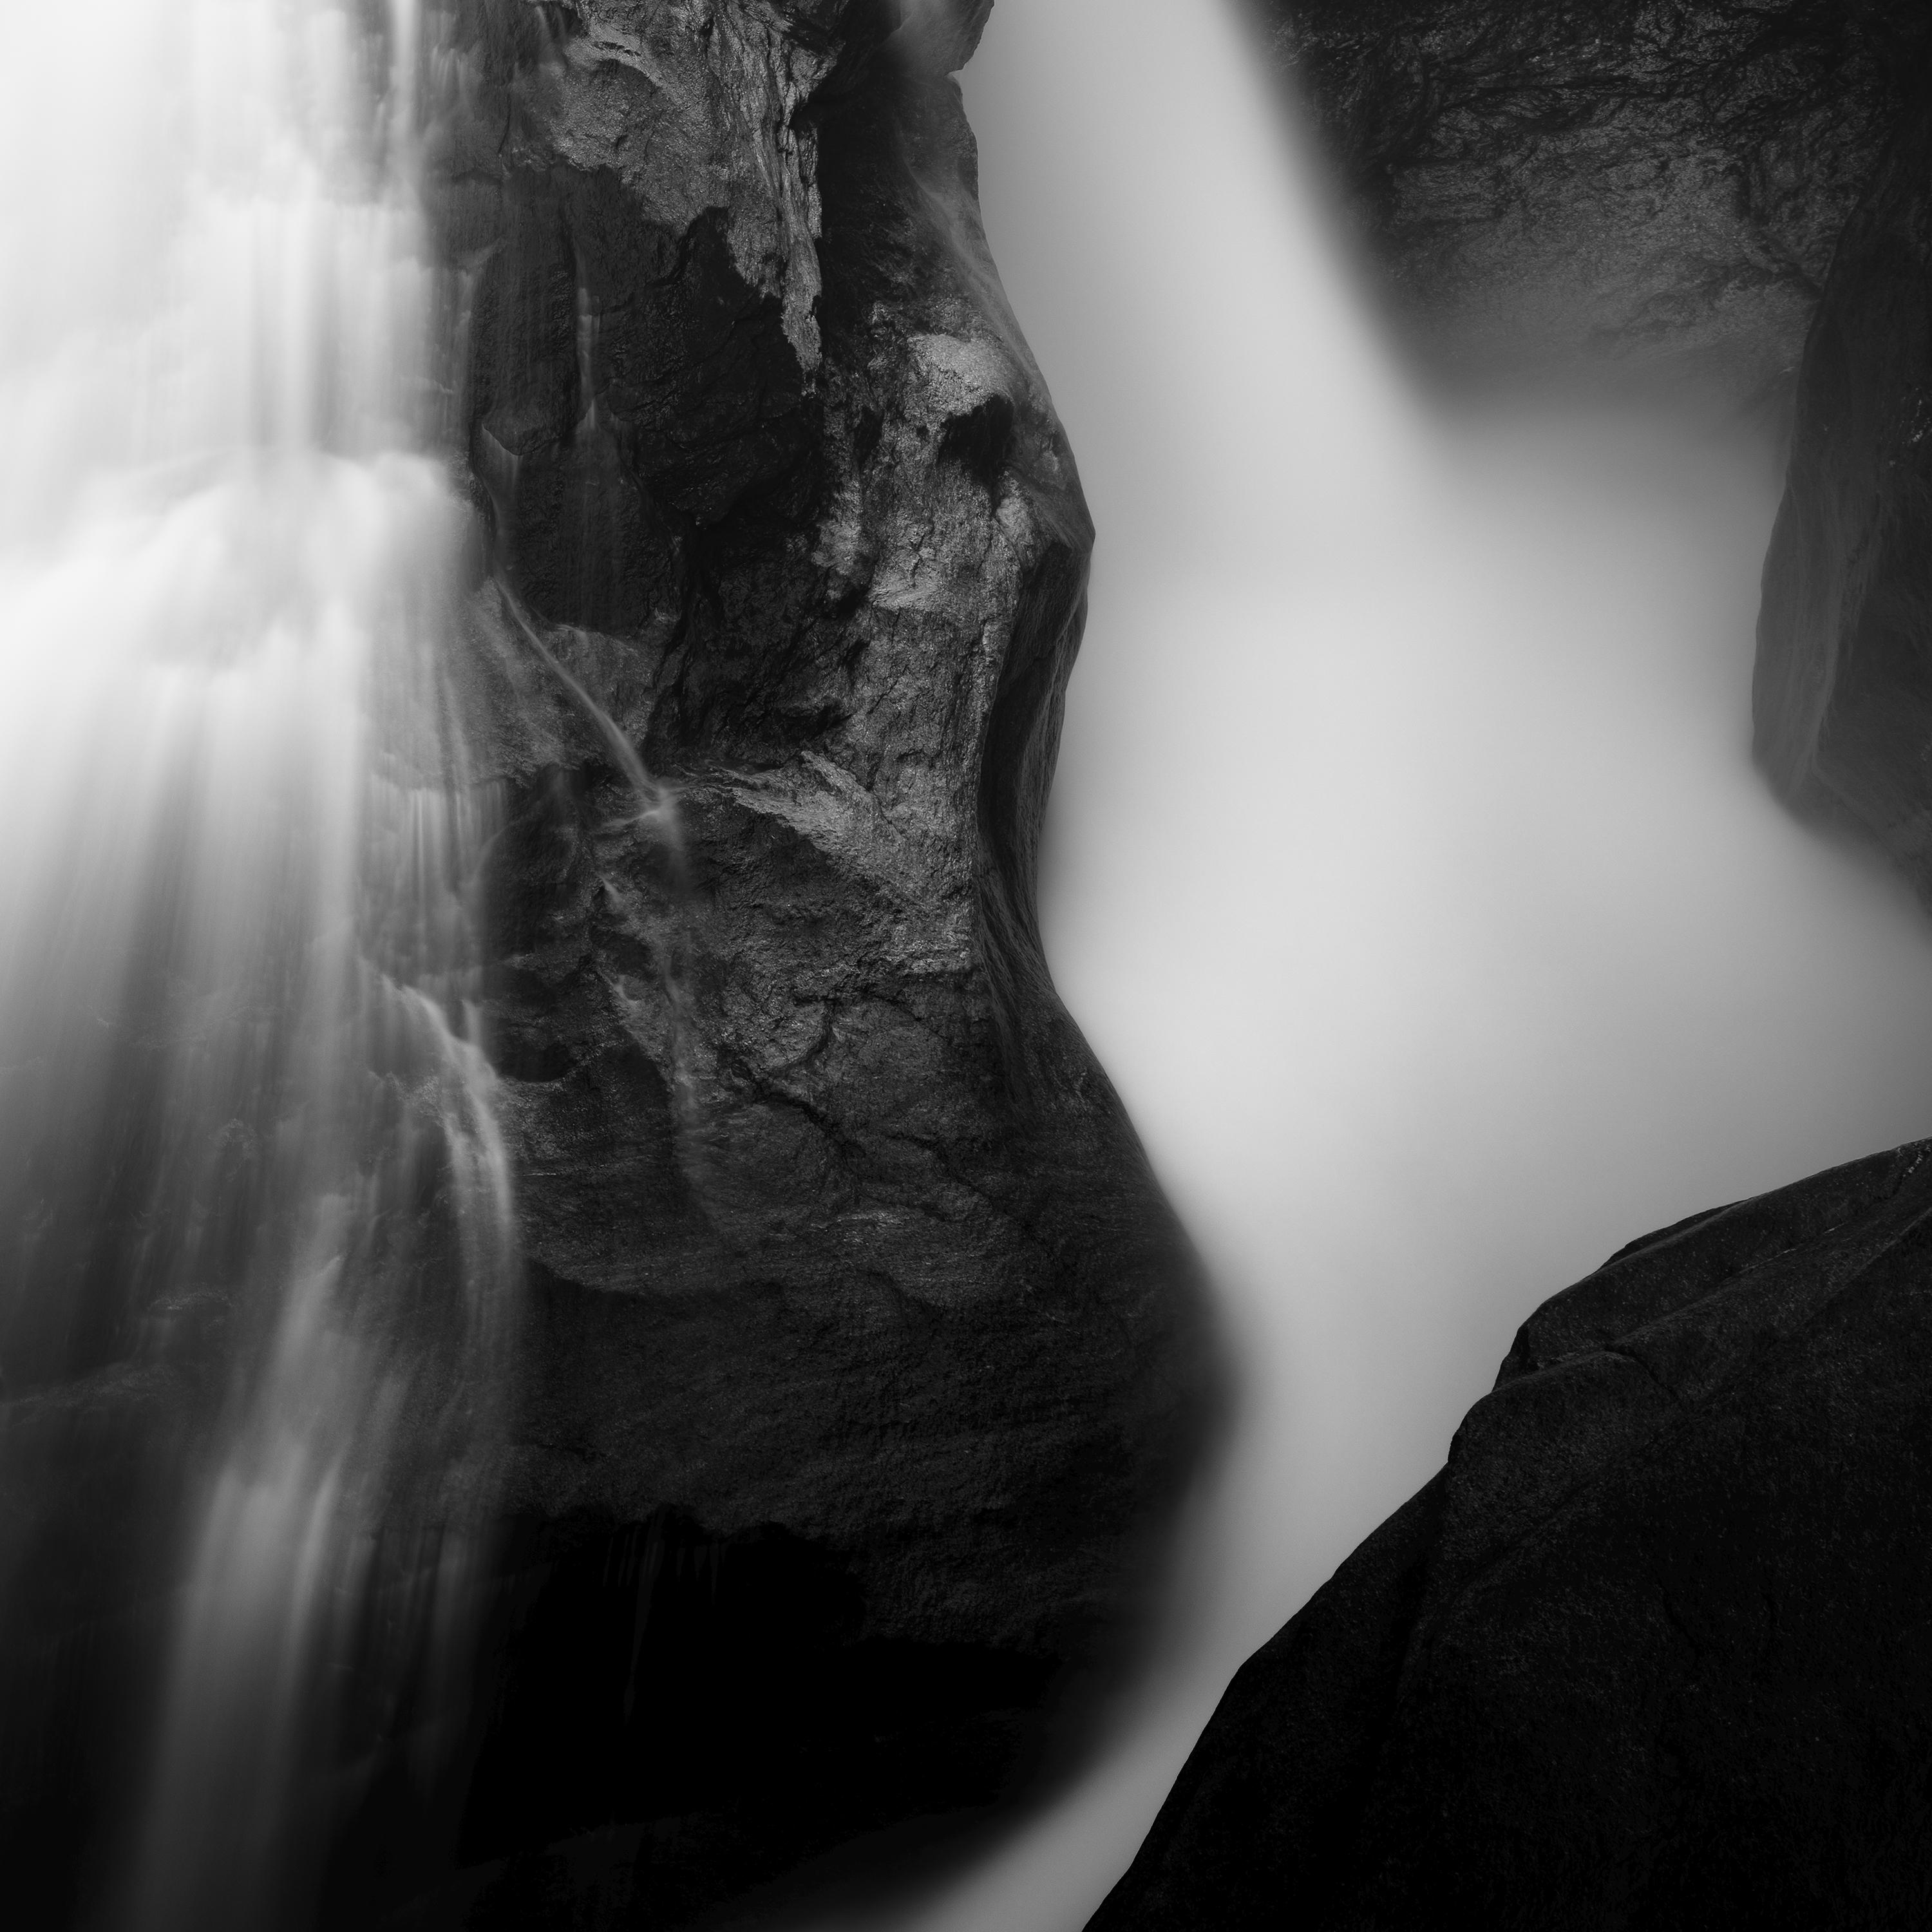 Krimmler Ache, waterfall, mountain river, black and white photography, landscape For Sale 5